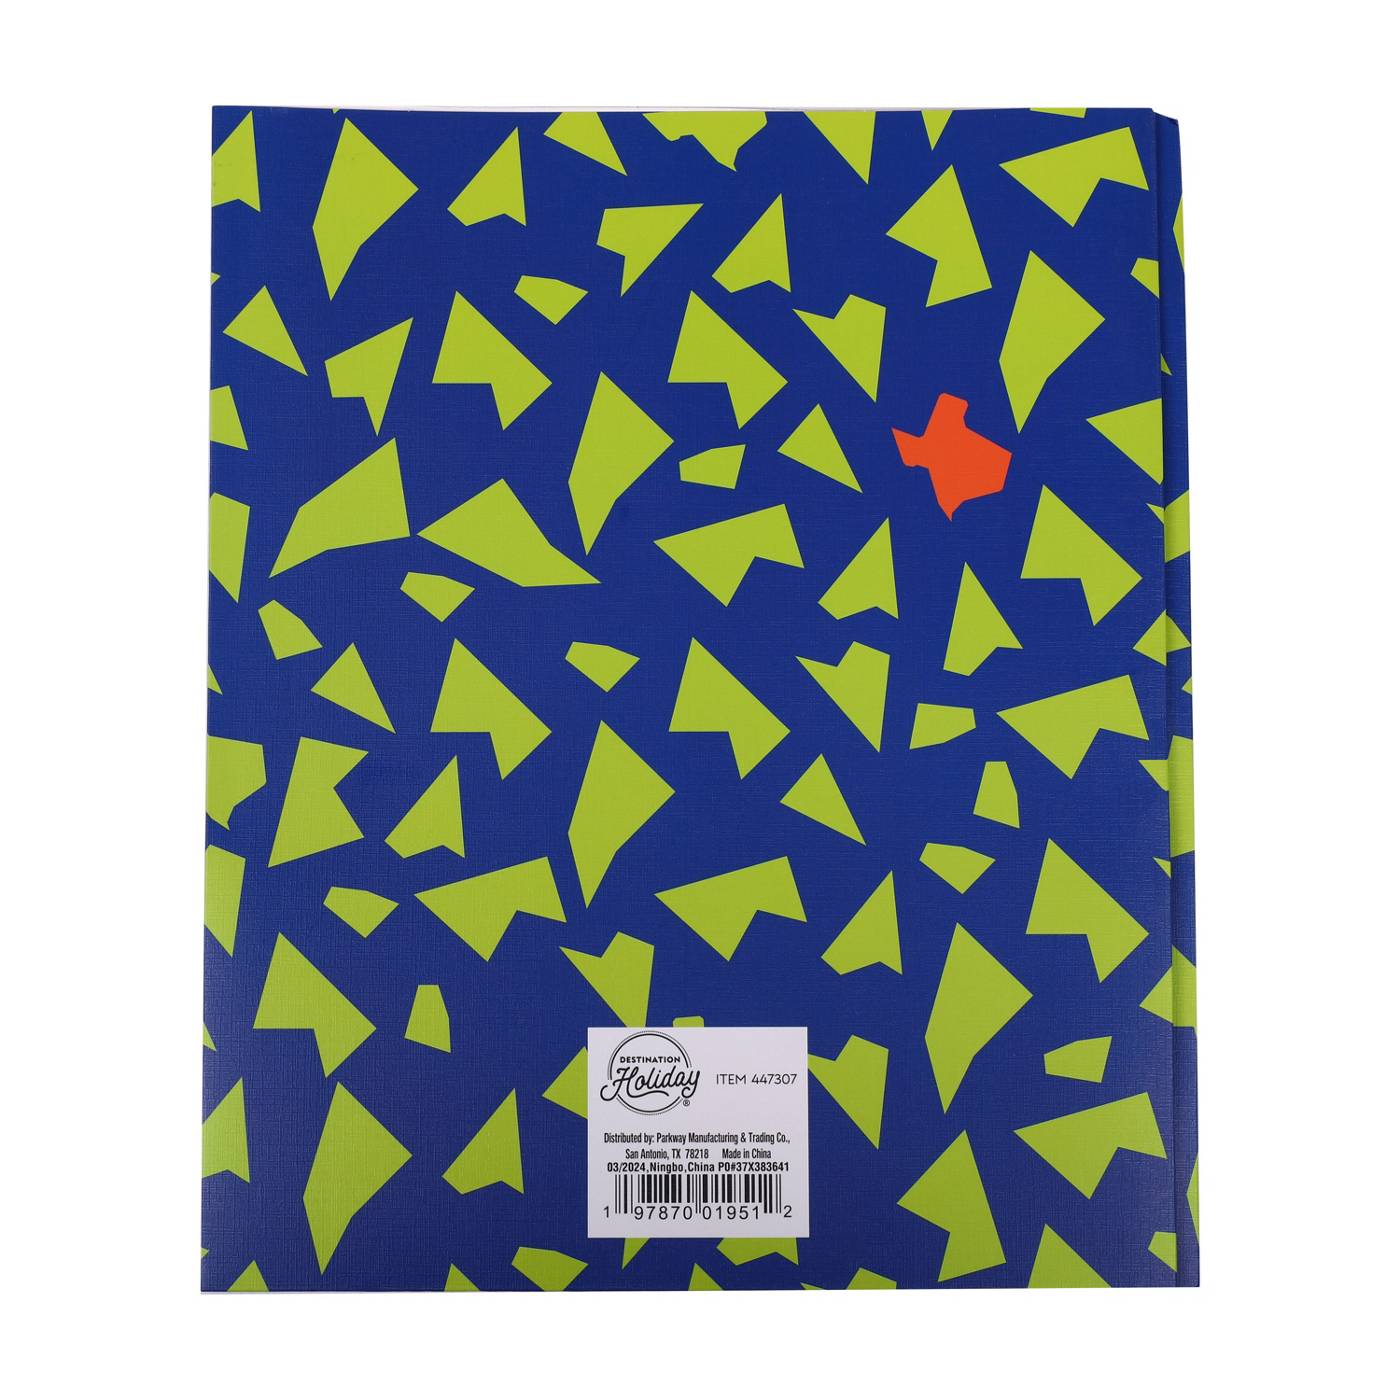 Destination Holiday Texas Pocket Paper Folder with Prongs - Blue; image 3 of 4